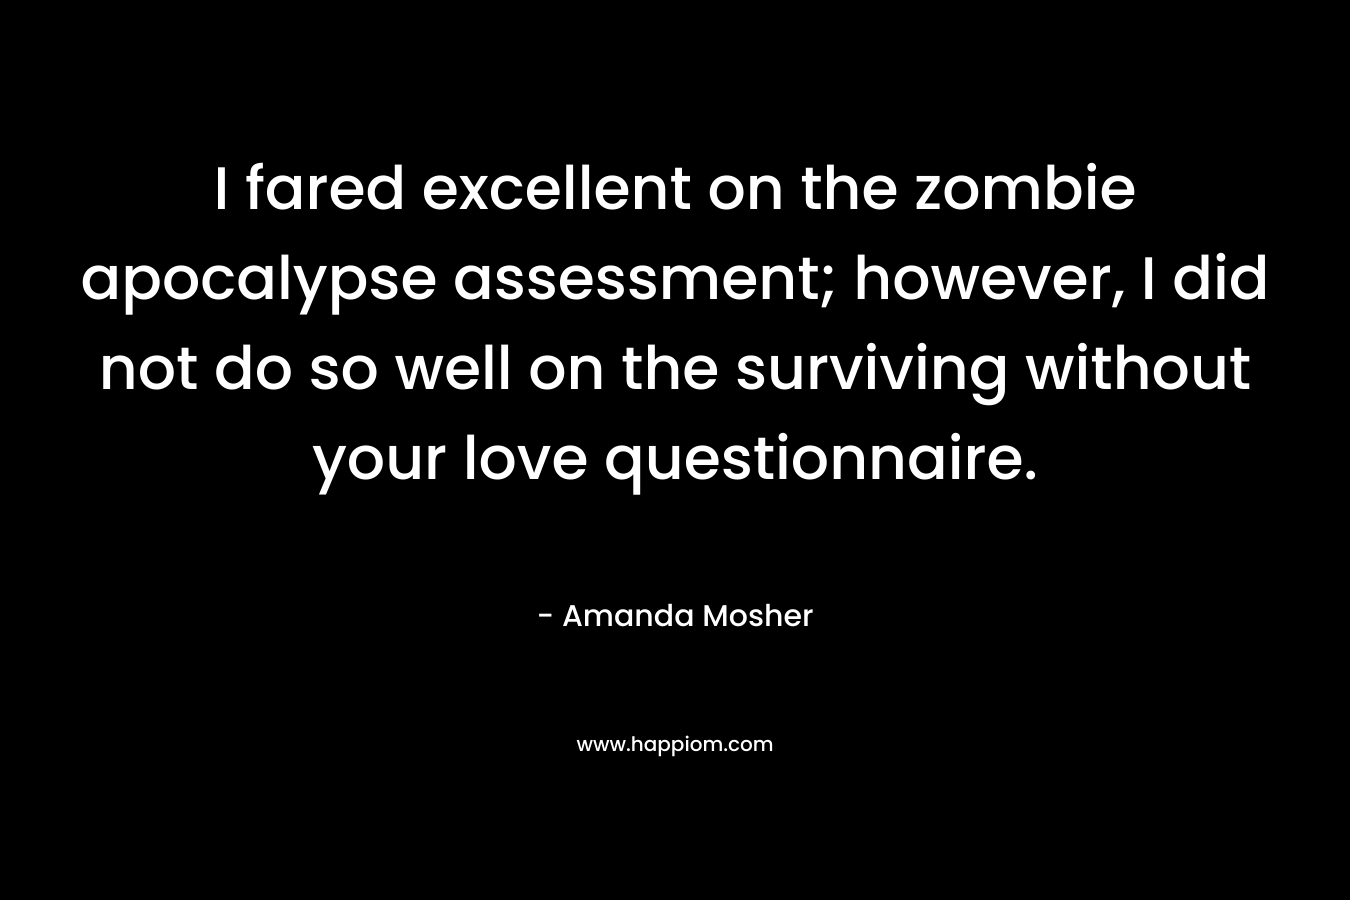 I fared excellent on the zombie apocalypse assessment; however, I did not do so well on the surviving without your love questionnaire.